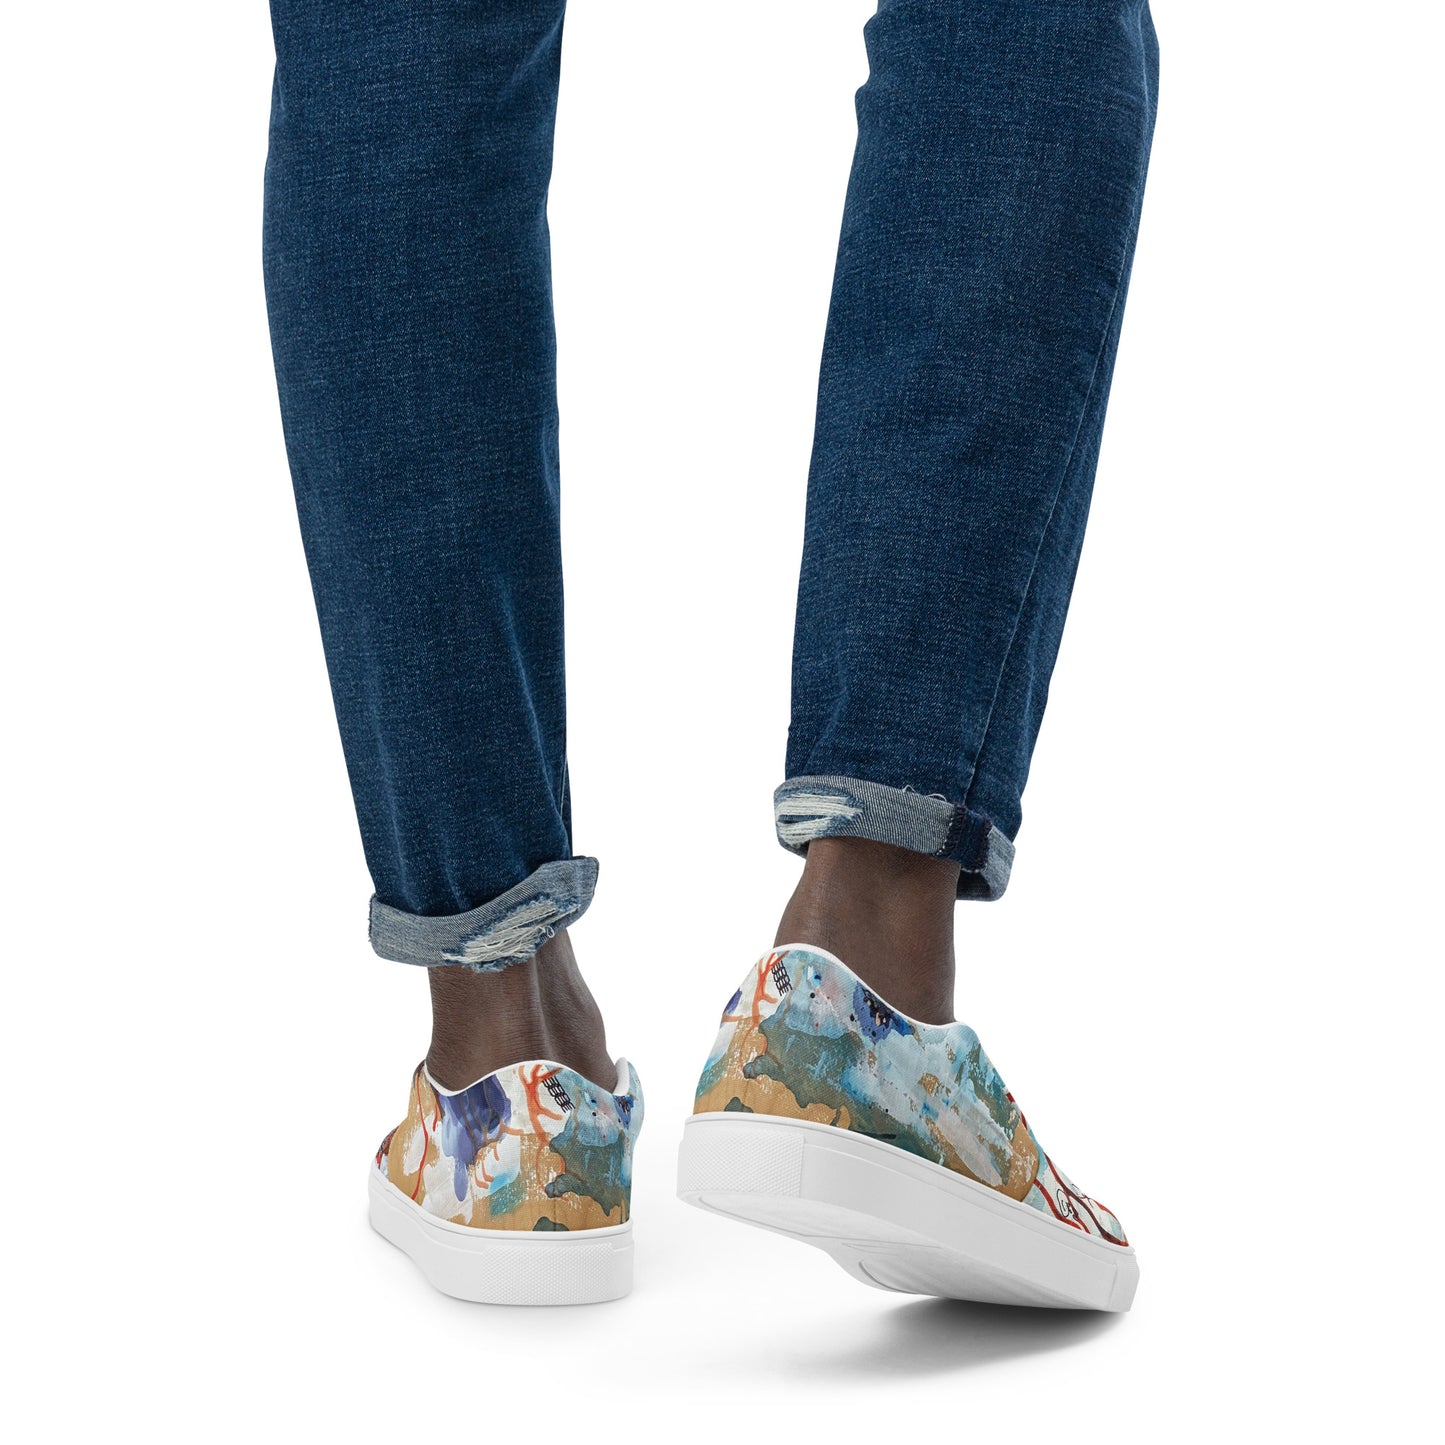 Men’s slip-on canvas shoes - Freedom